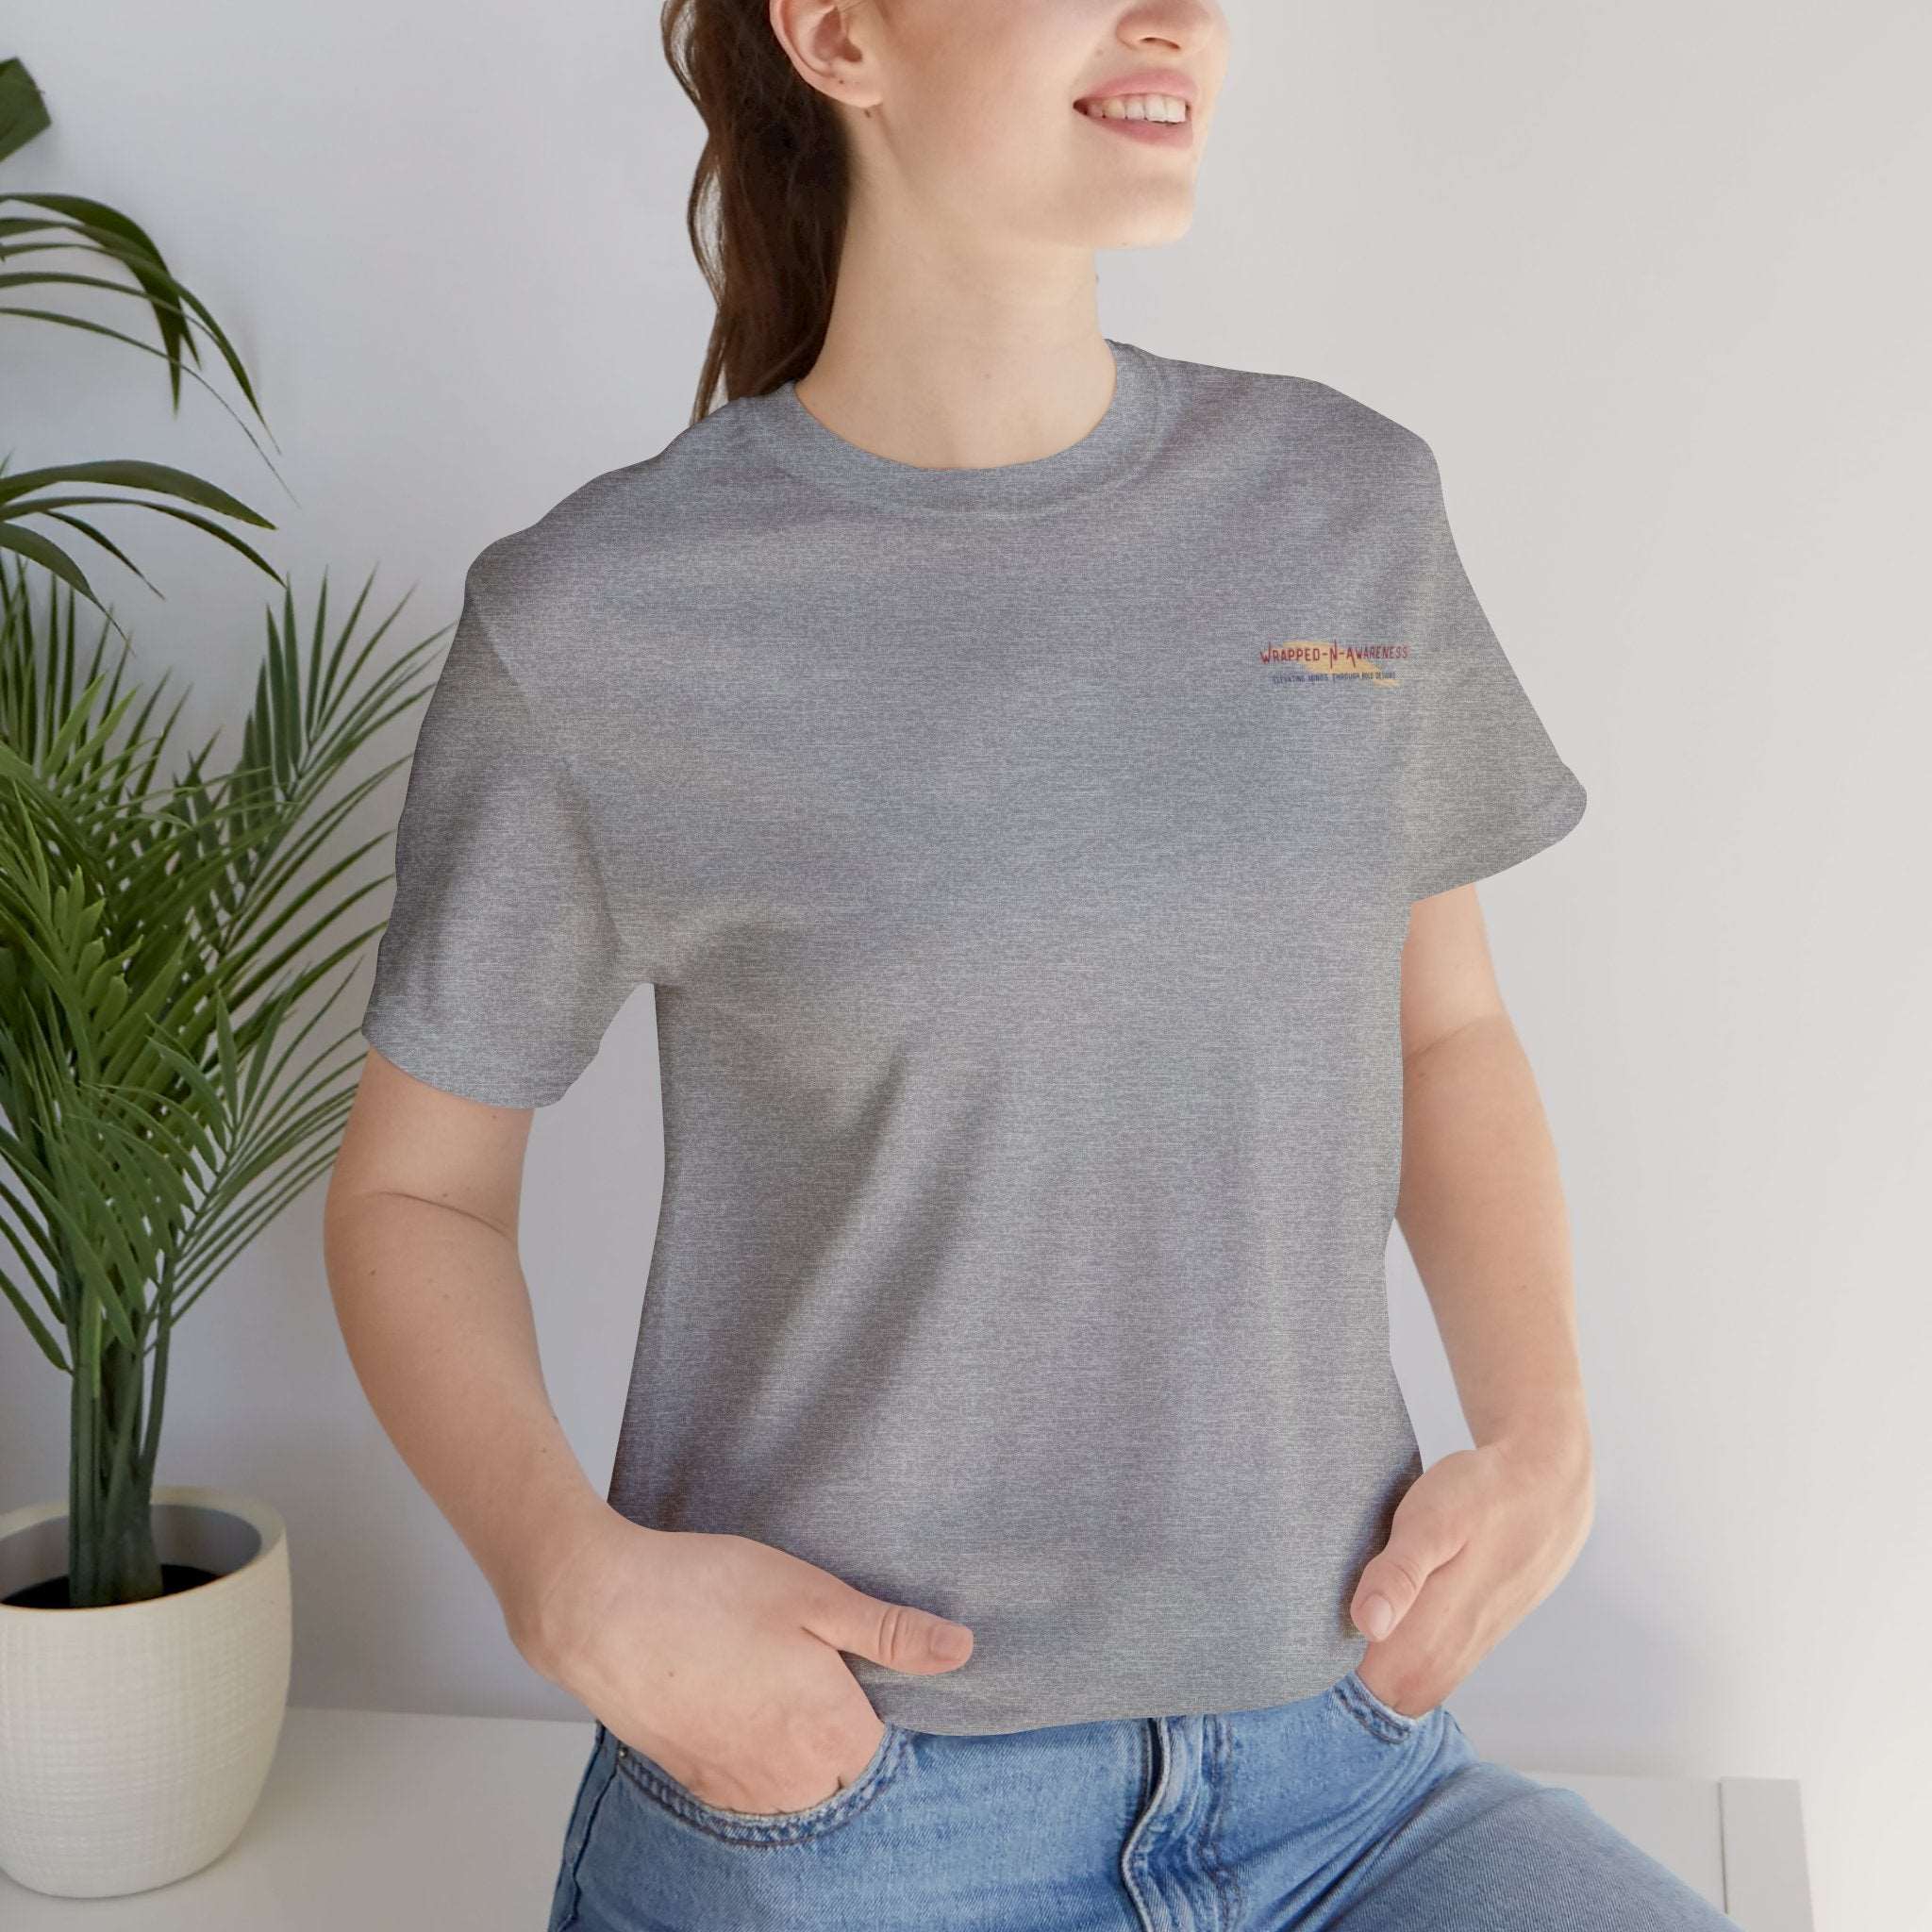 Choose Joy Daily Jersey Tee - Bella+Canvas 3001 Heather Mauve Airlume Cotton Bella+Canvas 3001 Crew Neckline Jersey Short Sleeve Lightweight Fabric Mental Health Support Retail Fit Tear-away Label Tee Unisex Tee T-Shirt 5261507316223492303_2048_4a1863b1-e45d-401f-a1be-b3d88d6a56eb Printify